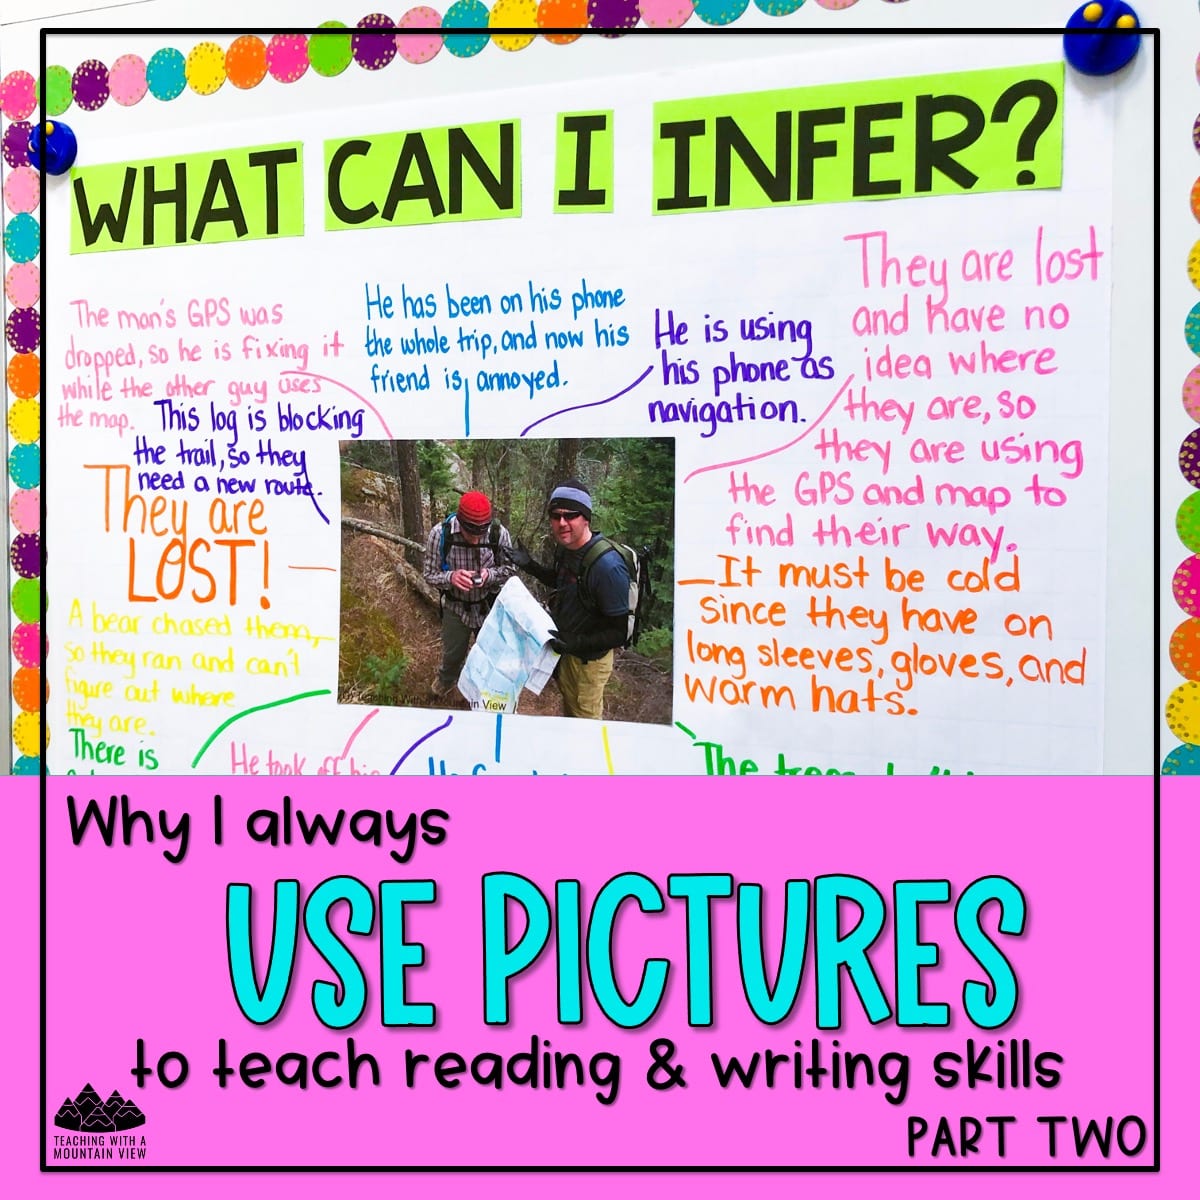 Using Pictures to Teach Reading Skills isn't a new idea over at Teaching With a Mountain View, but it sure has evolved over the years!